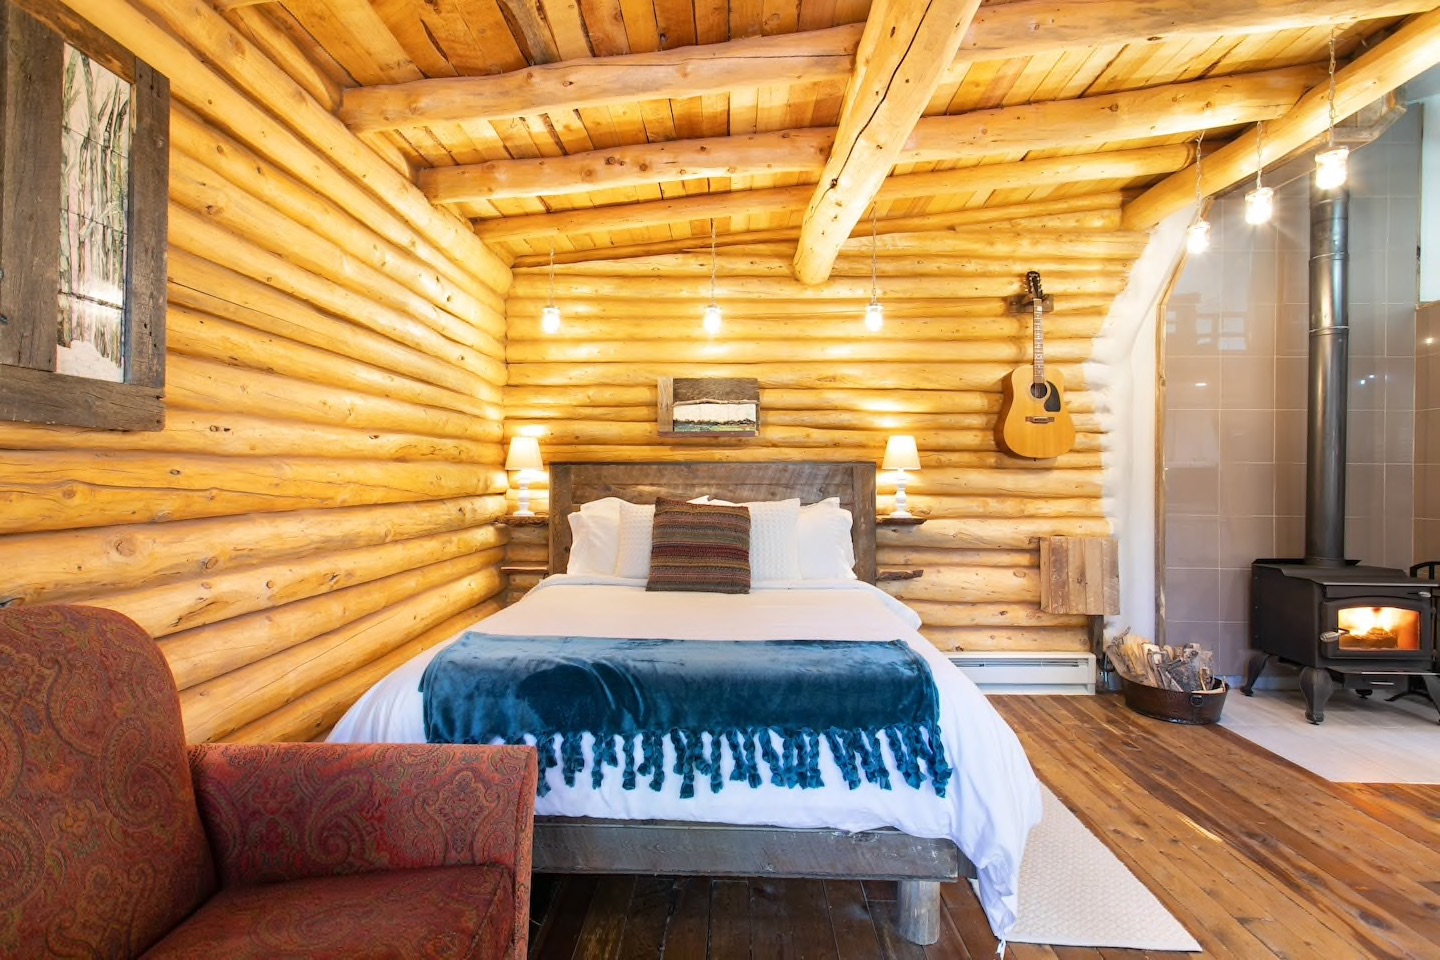 The Boho Chic Log Cabin with Zipline is one of the best Airbnbs in Boulder